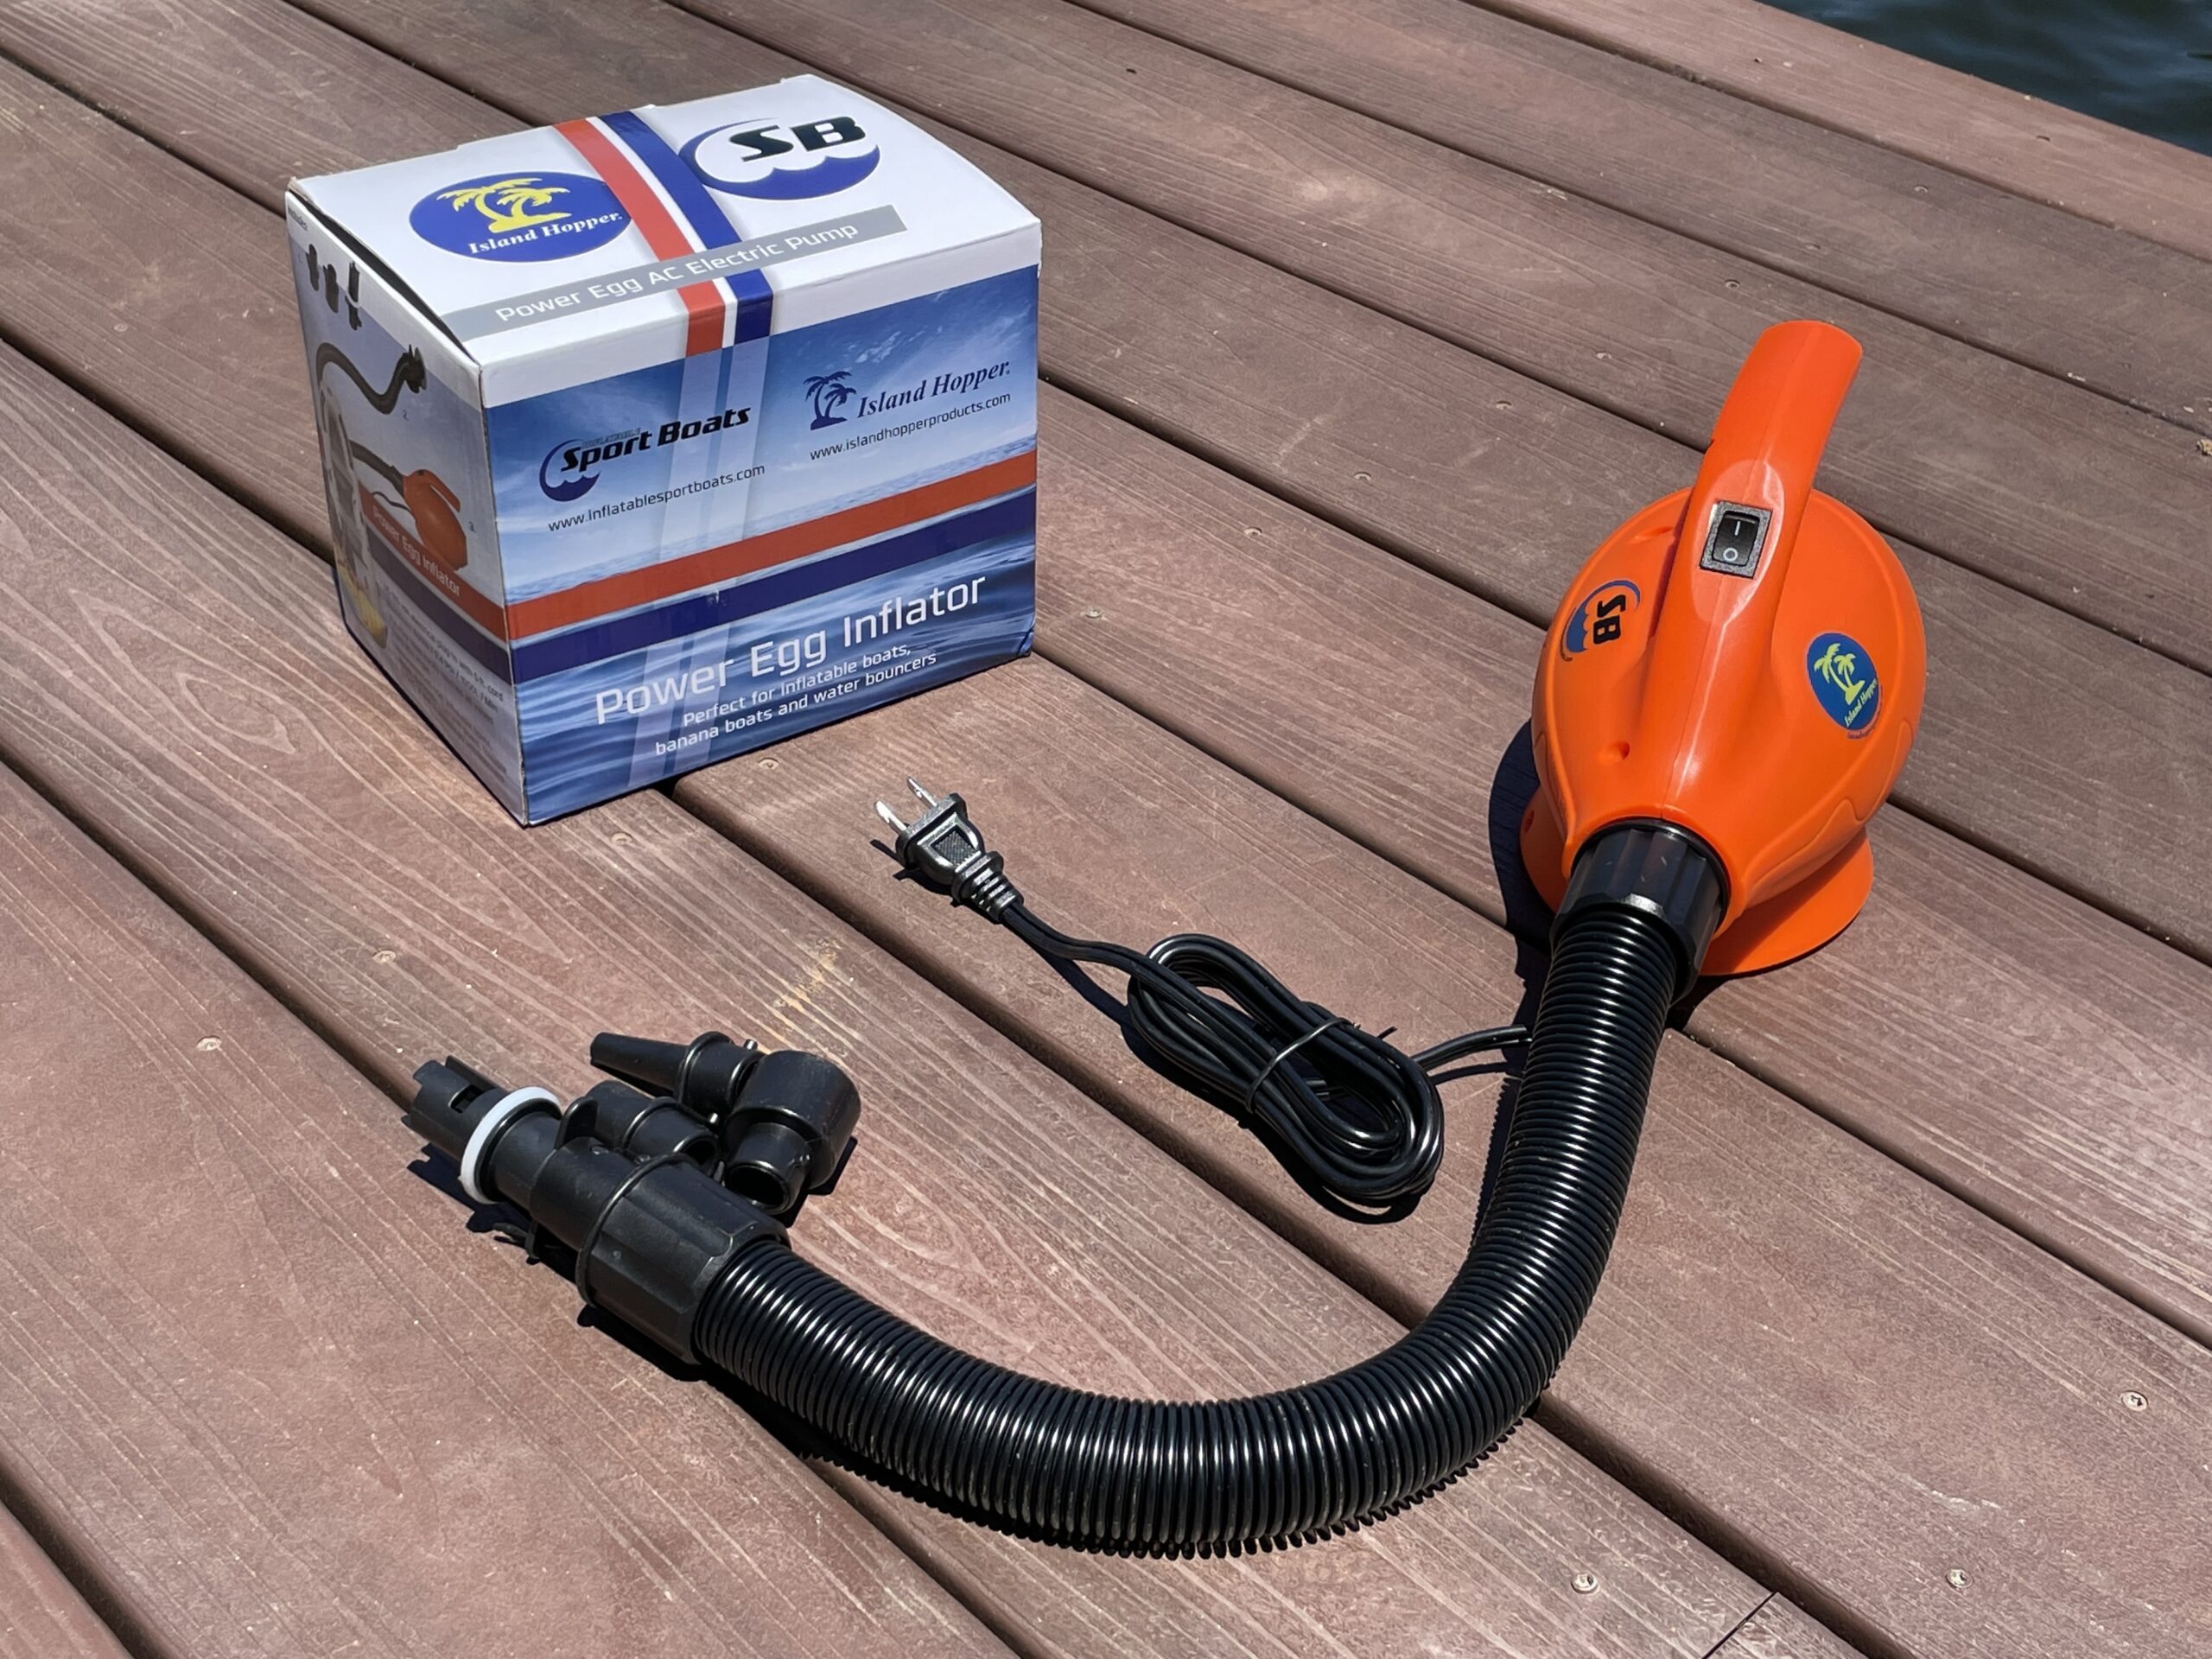 Inflatable Sport Boats Power Egg inflator pump for your inflatable